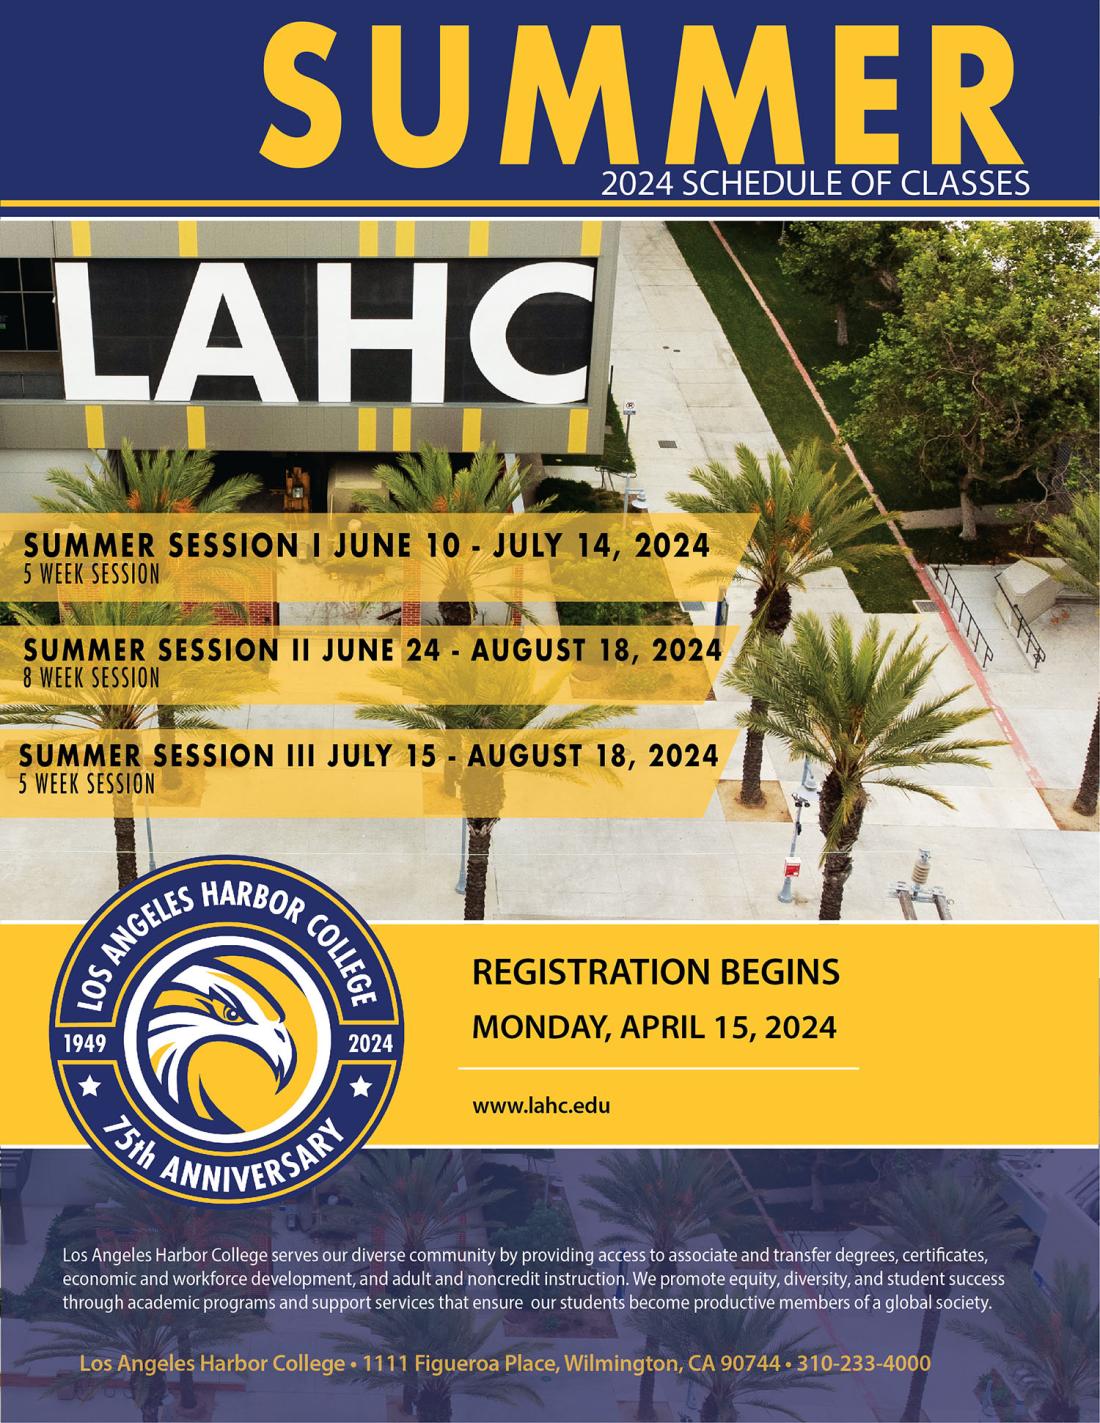 LAHC Summer 2024 Schedule Cover